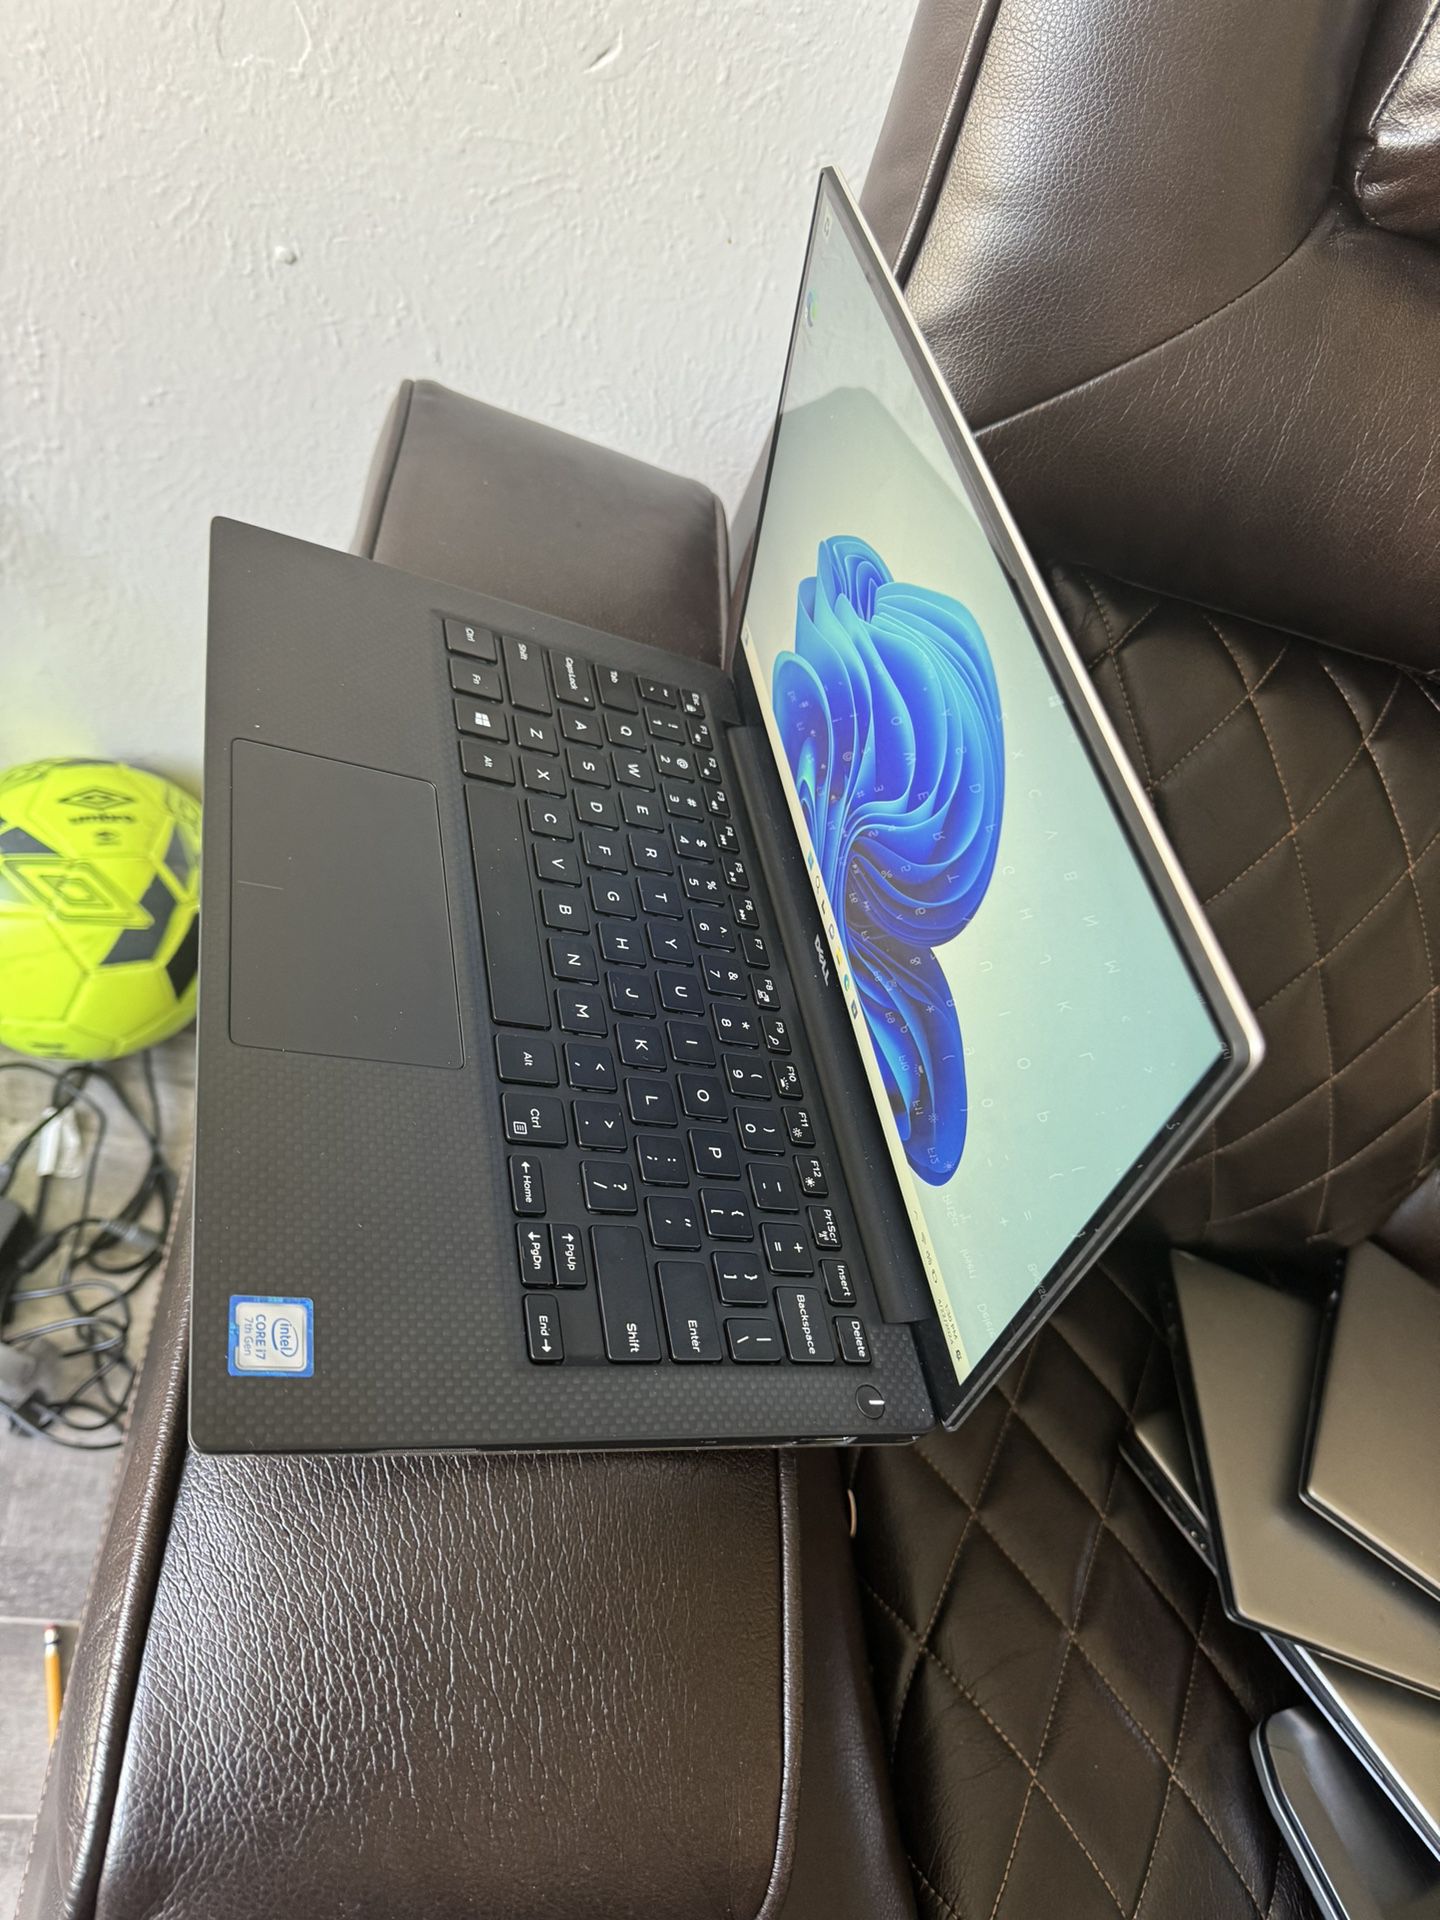 Dell Laptop Windows 11 Touchscreen 2017 Reduced Price 